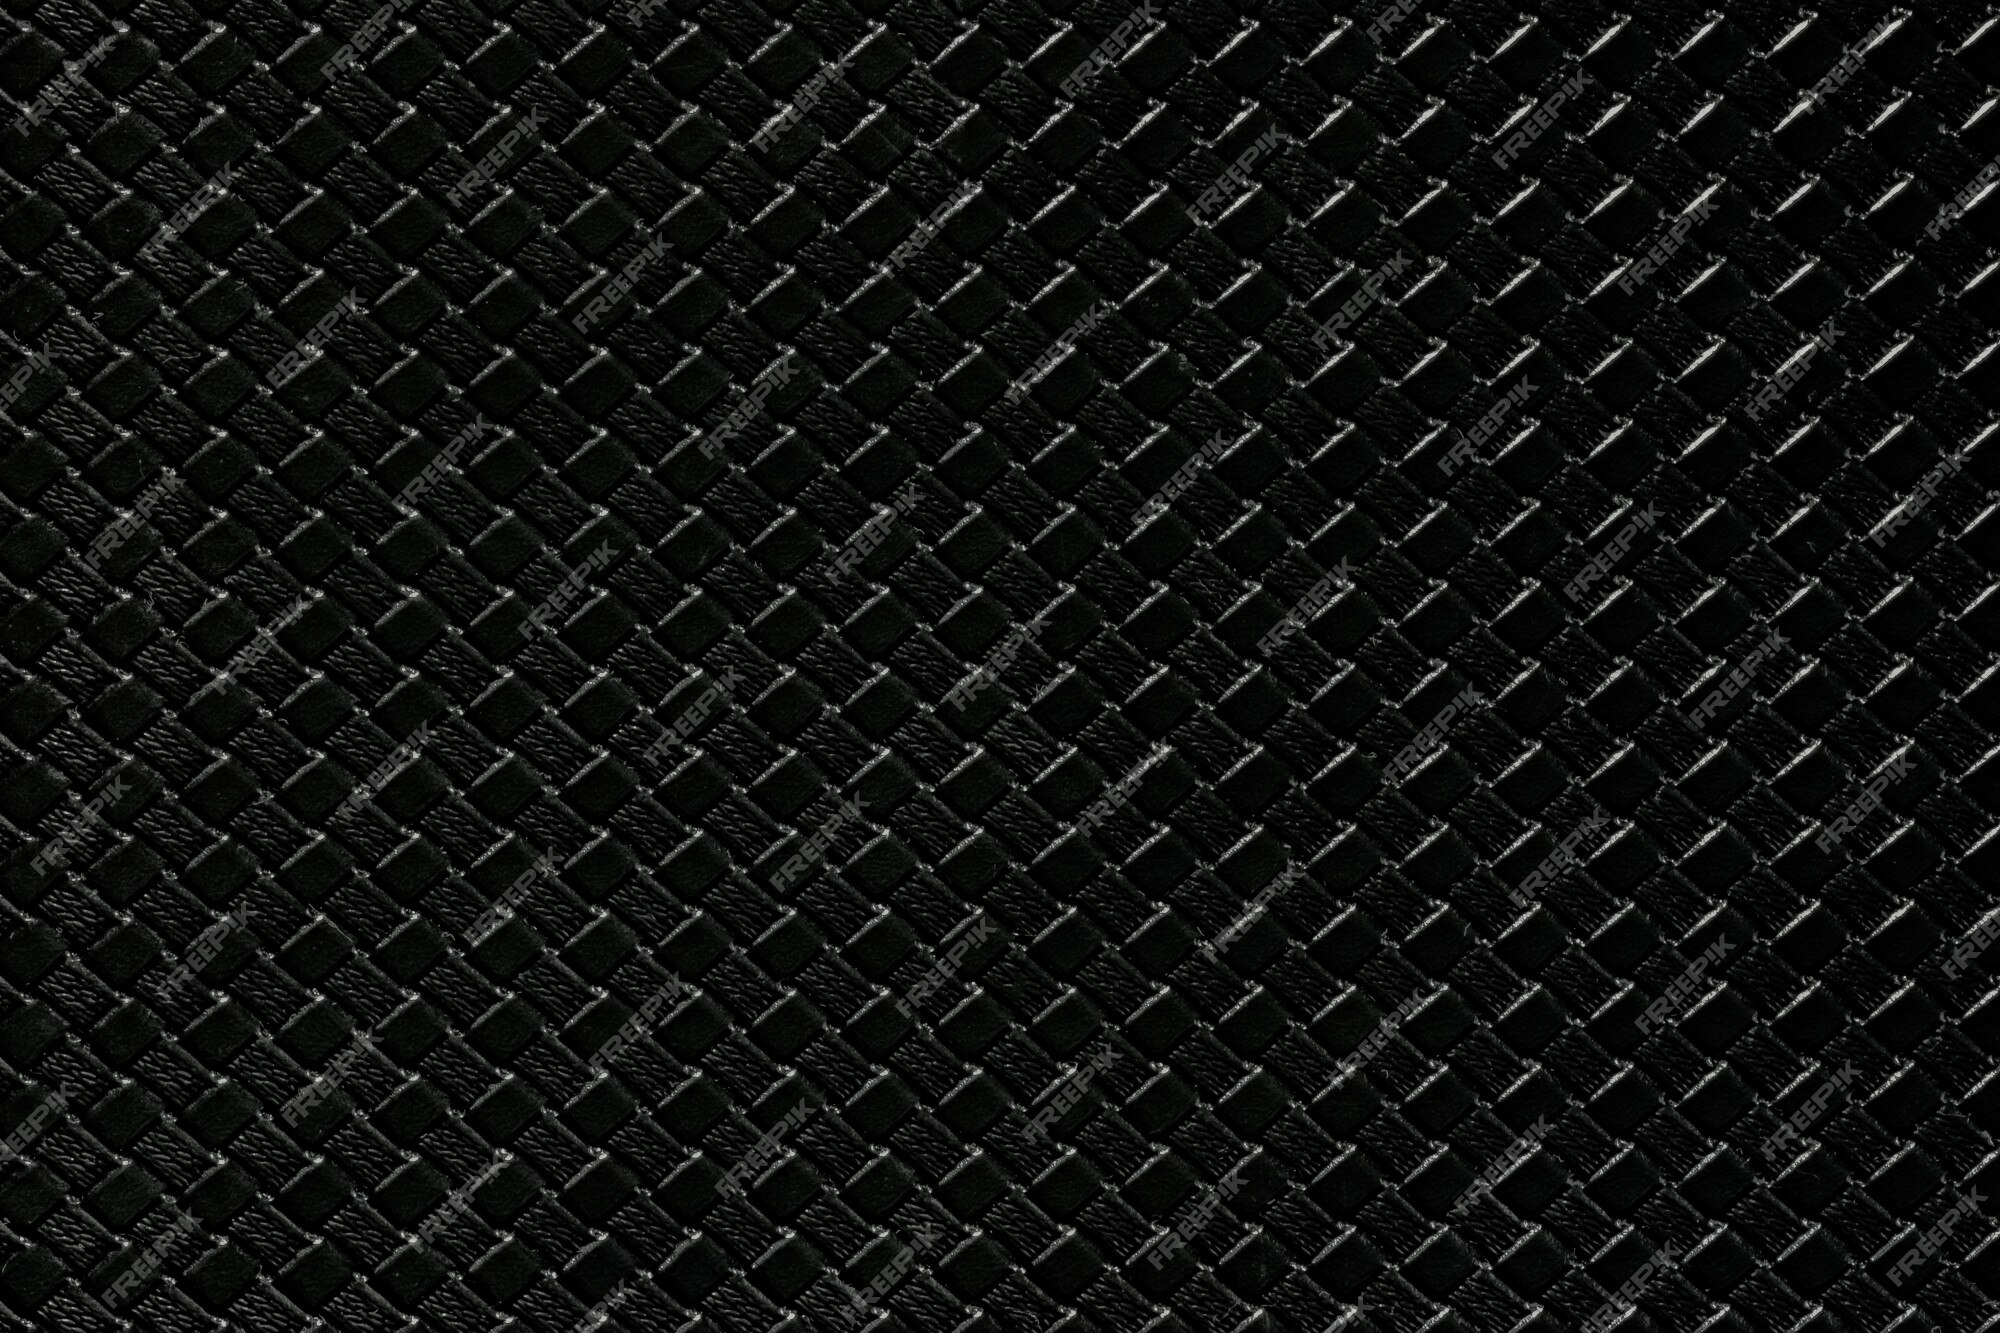 Premium Photo | Black leather background with imitation weave texture.  glossy artificial leather structure.